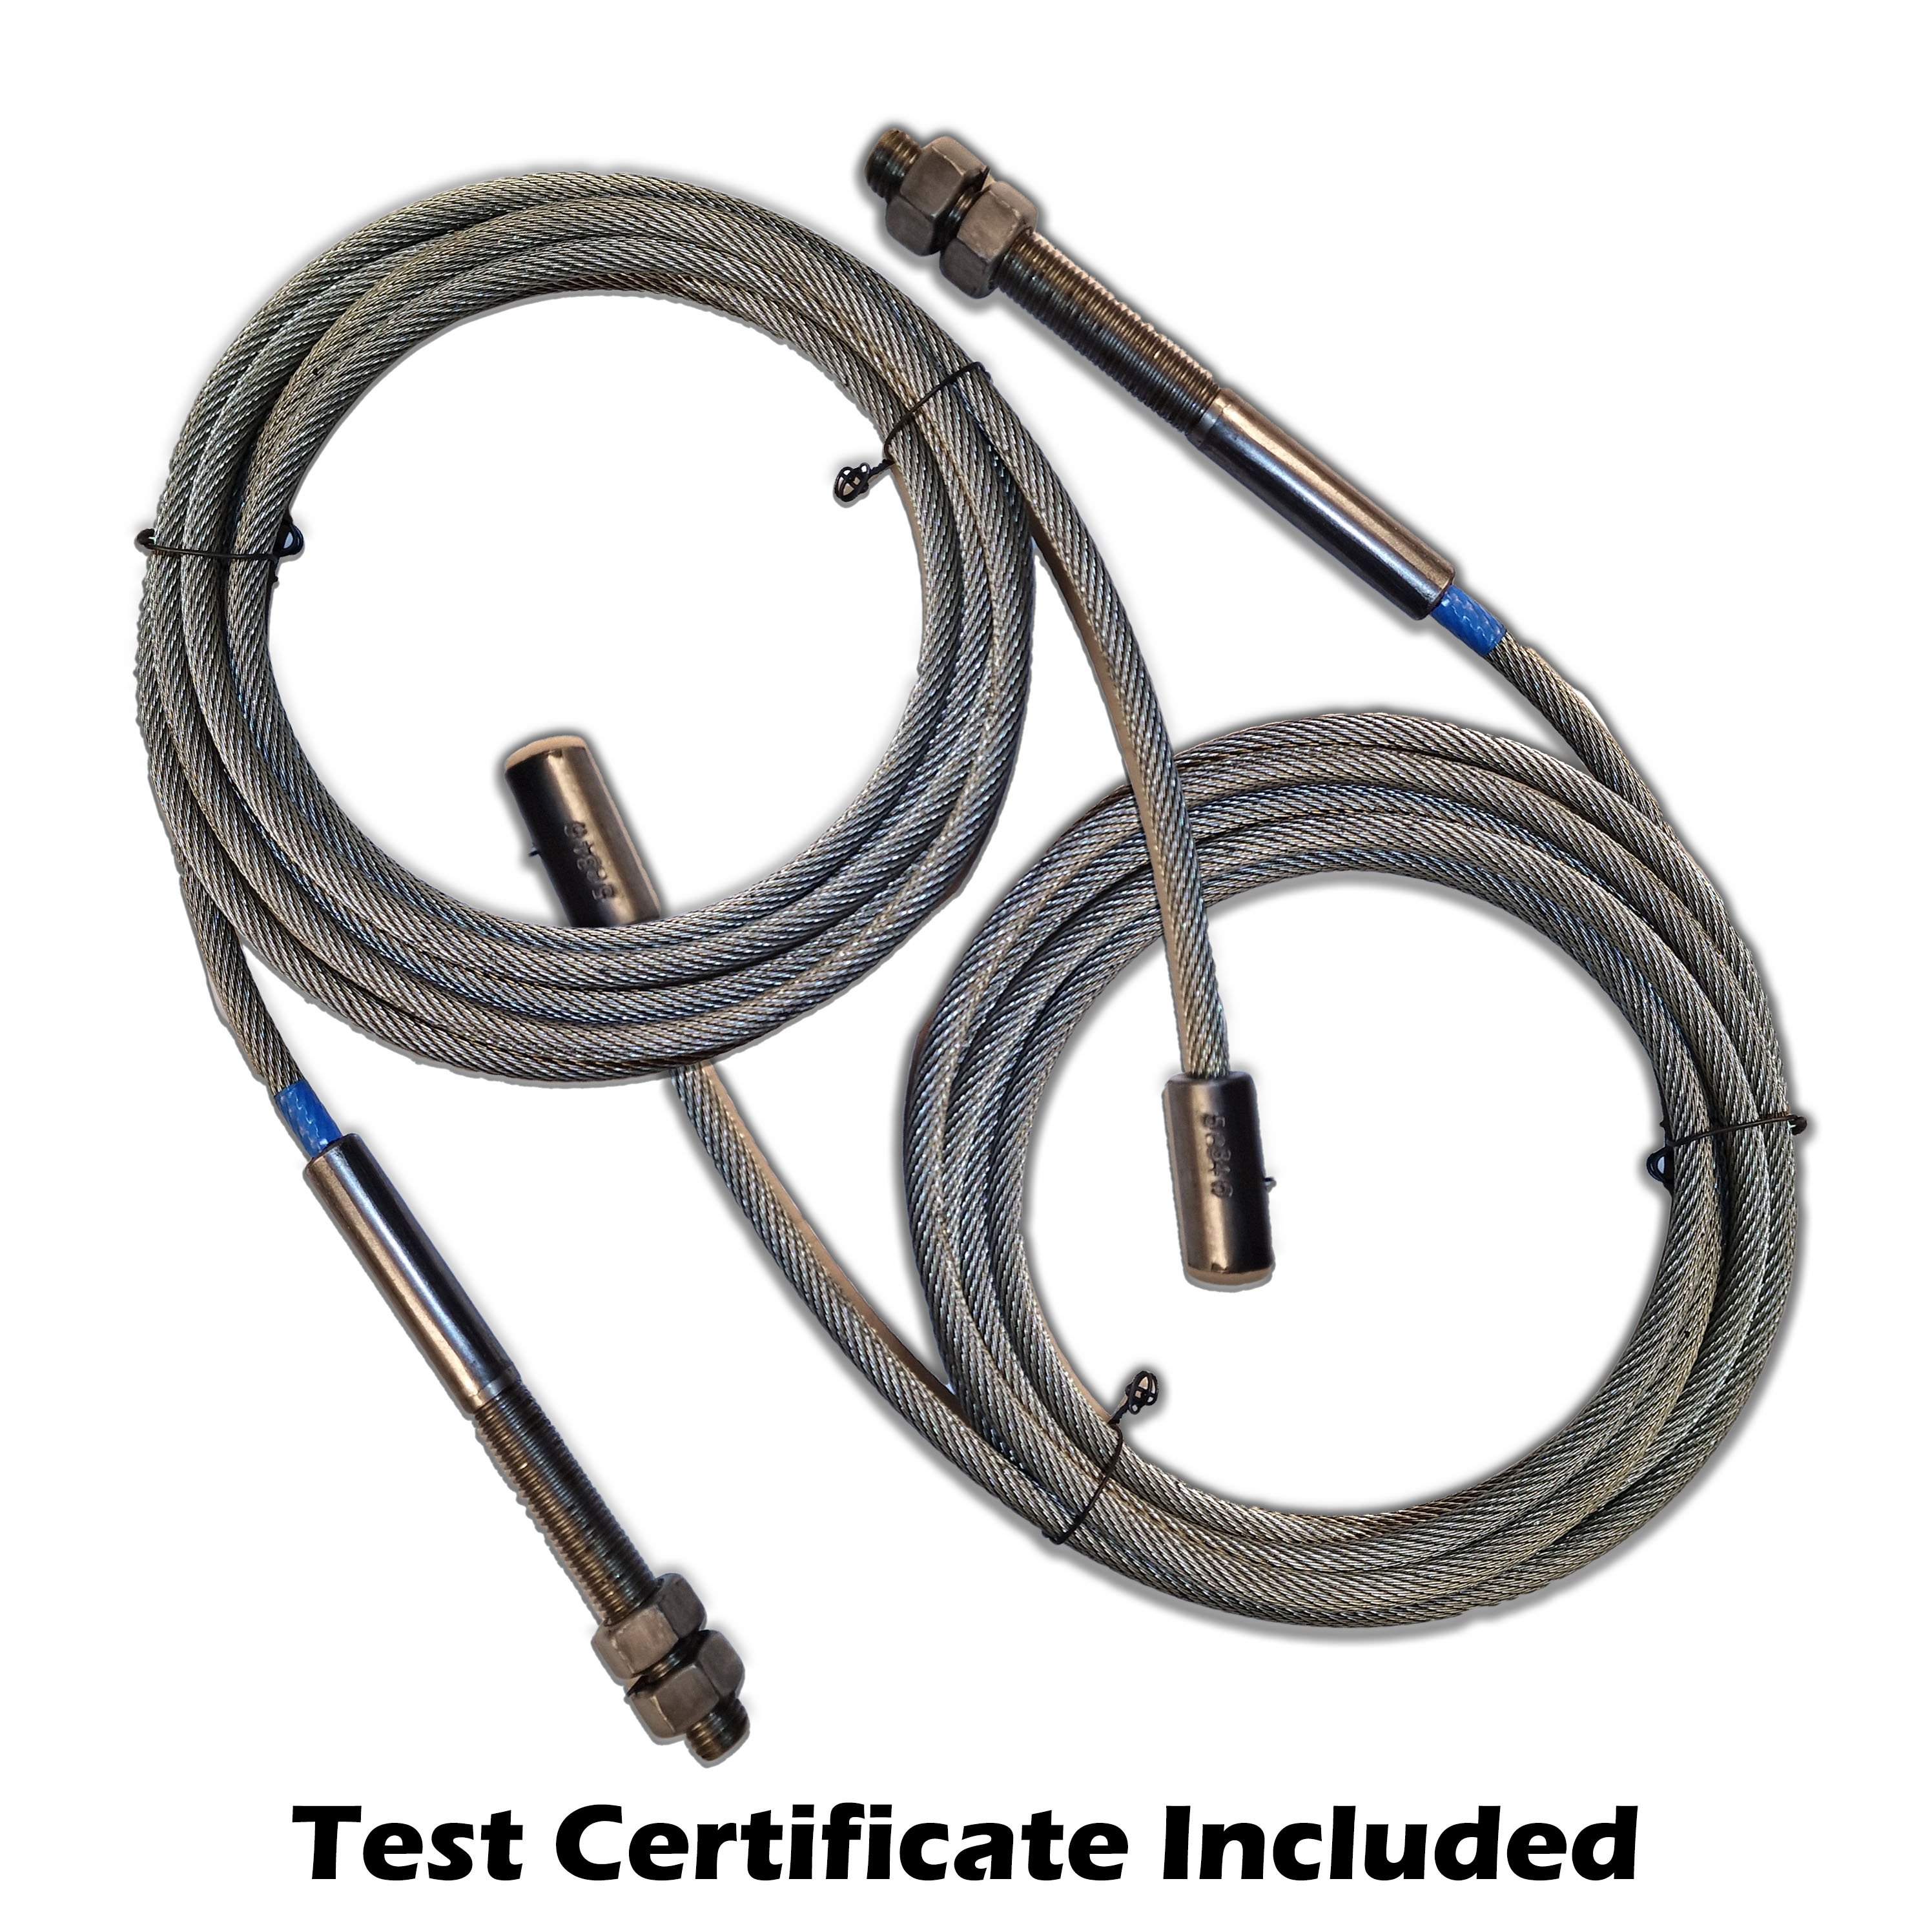 Laycock / Tecalemit Hi Speed lift cables